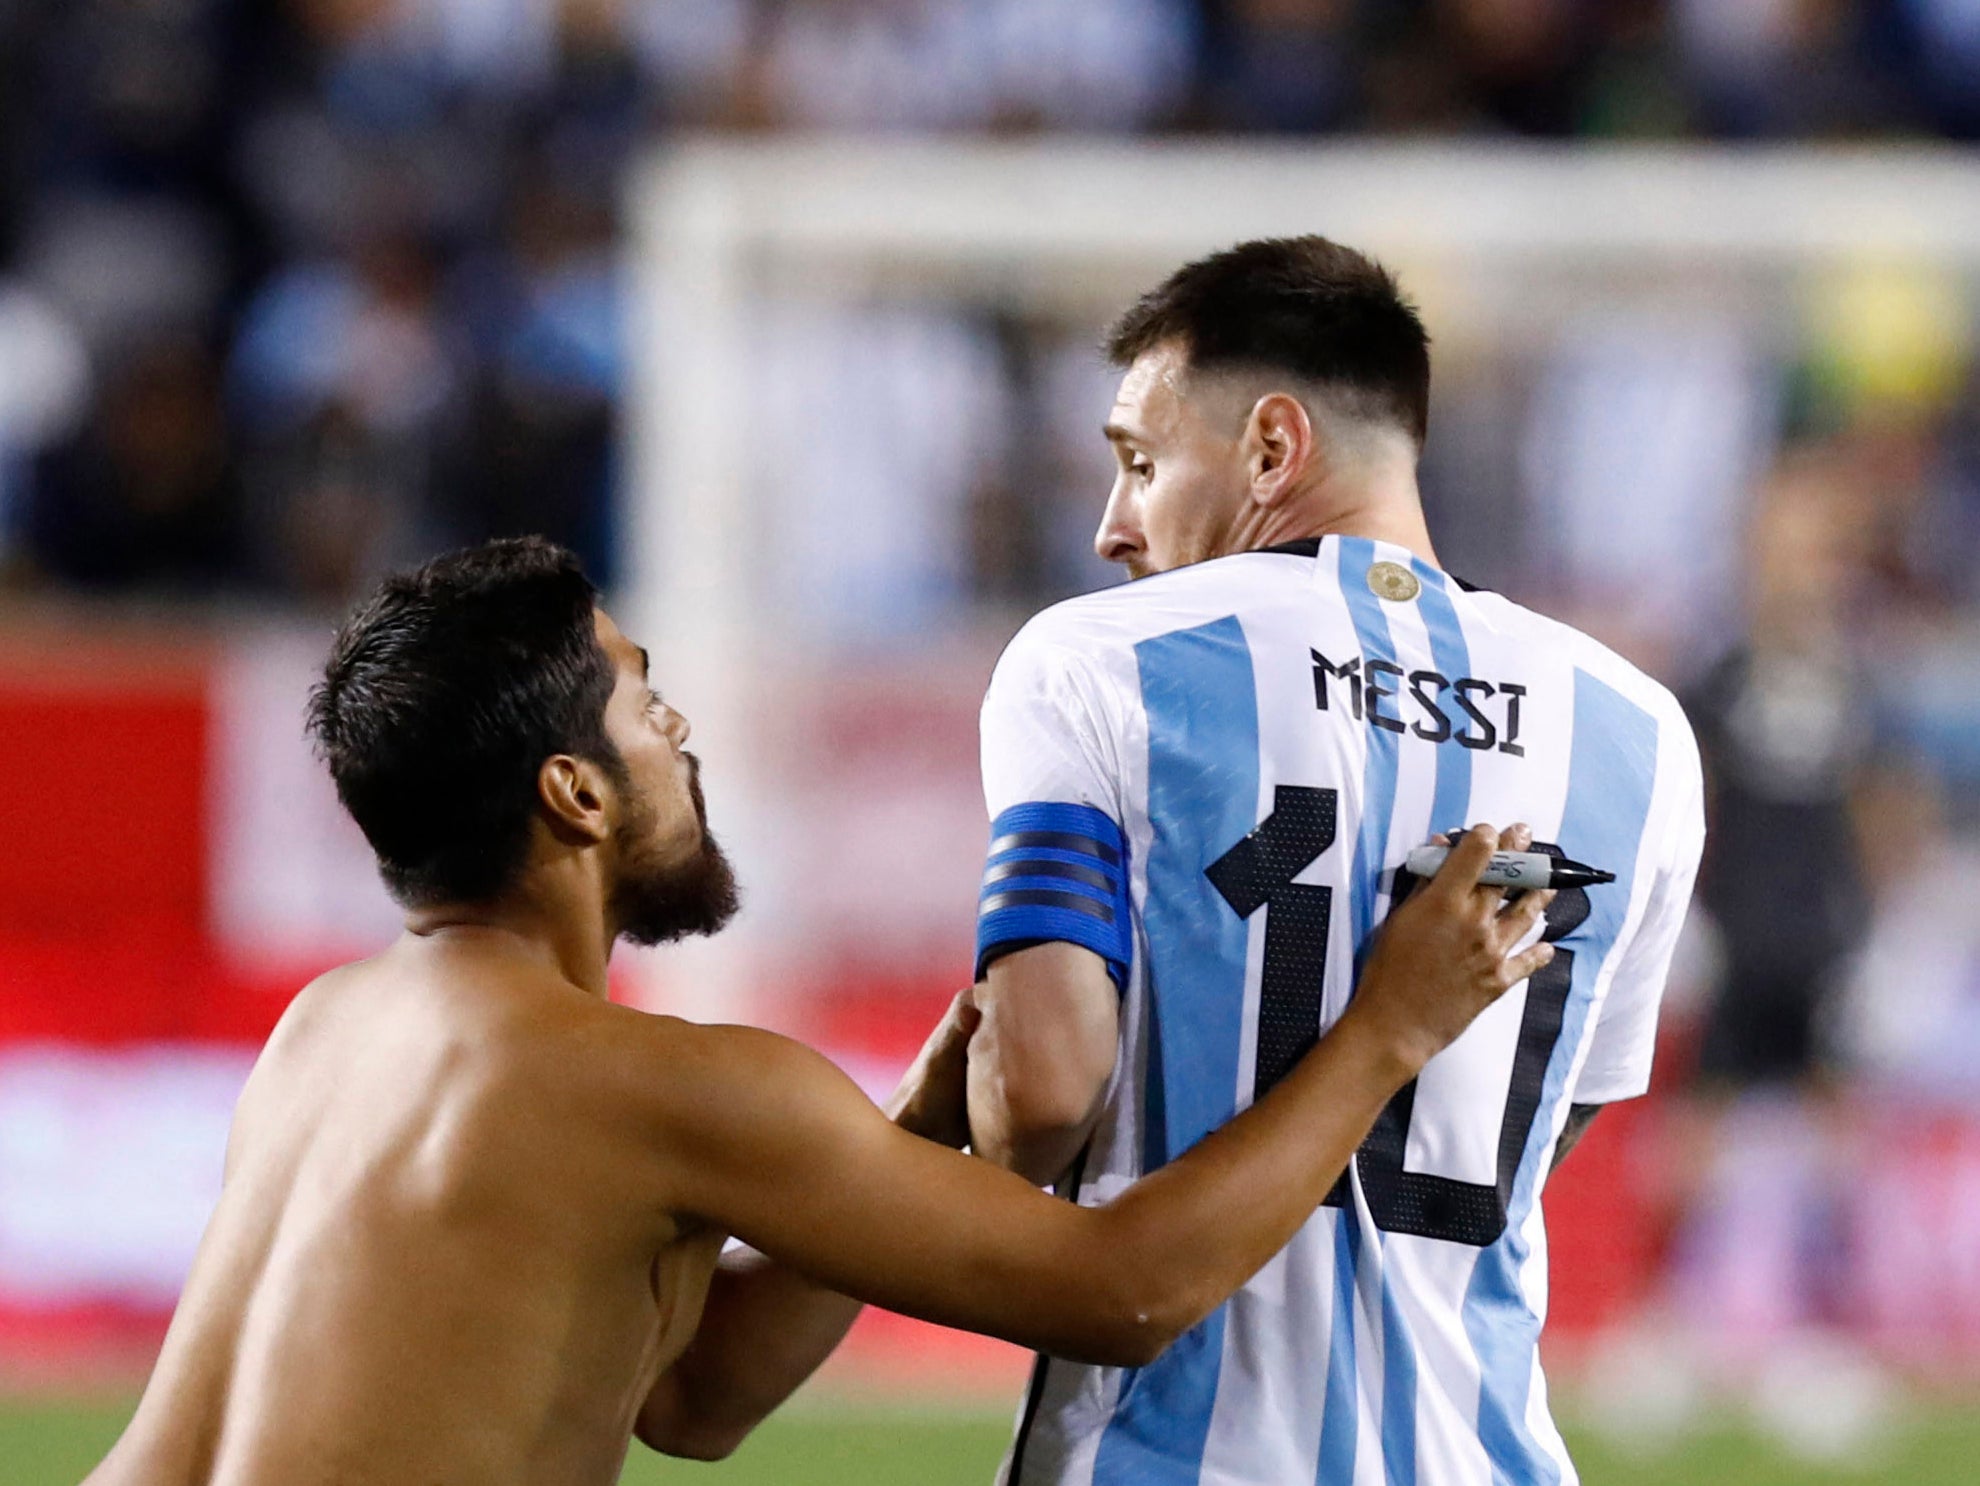 A fan approaches Lionel Messi before asking the Argentina captain to sign his back